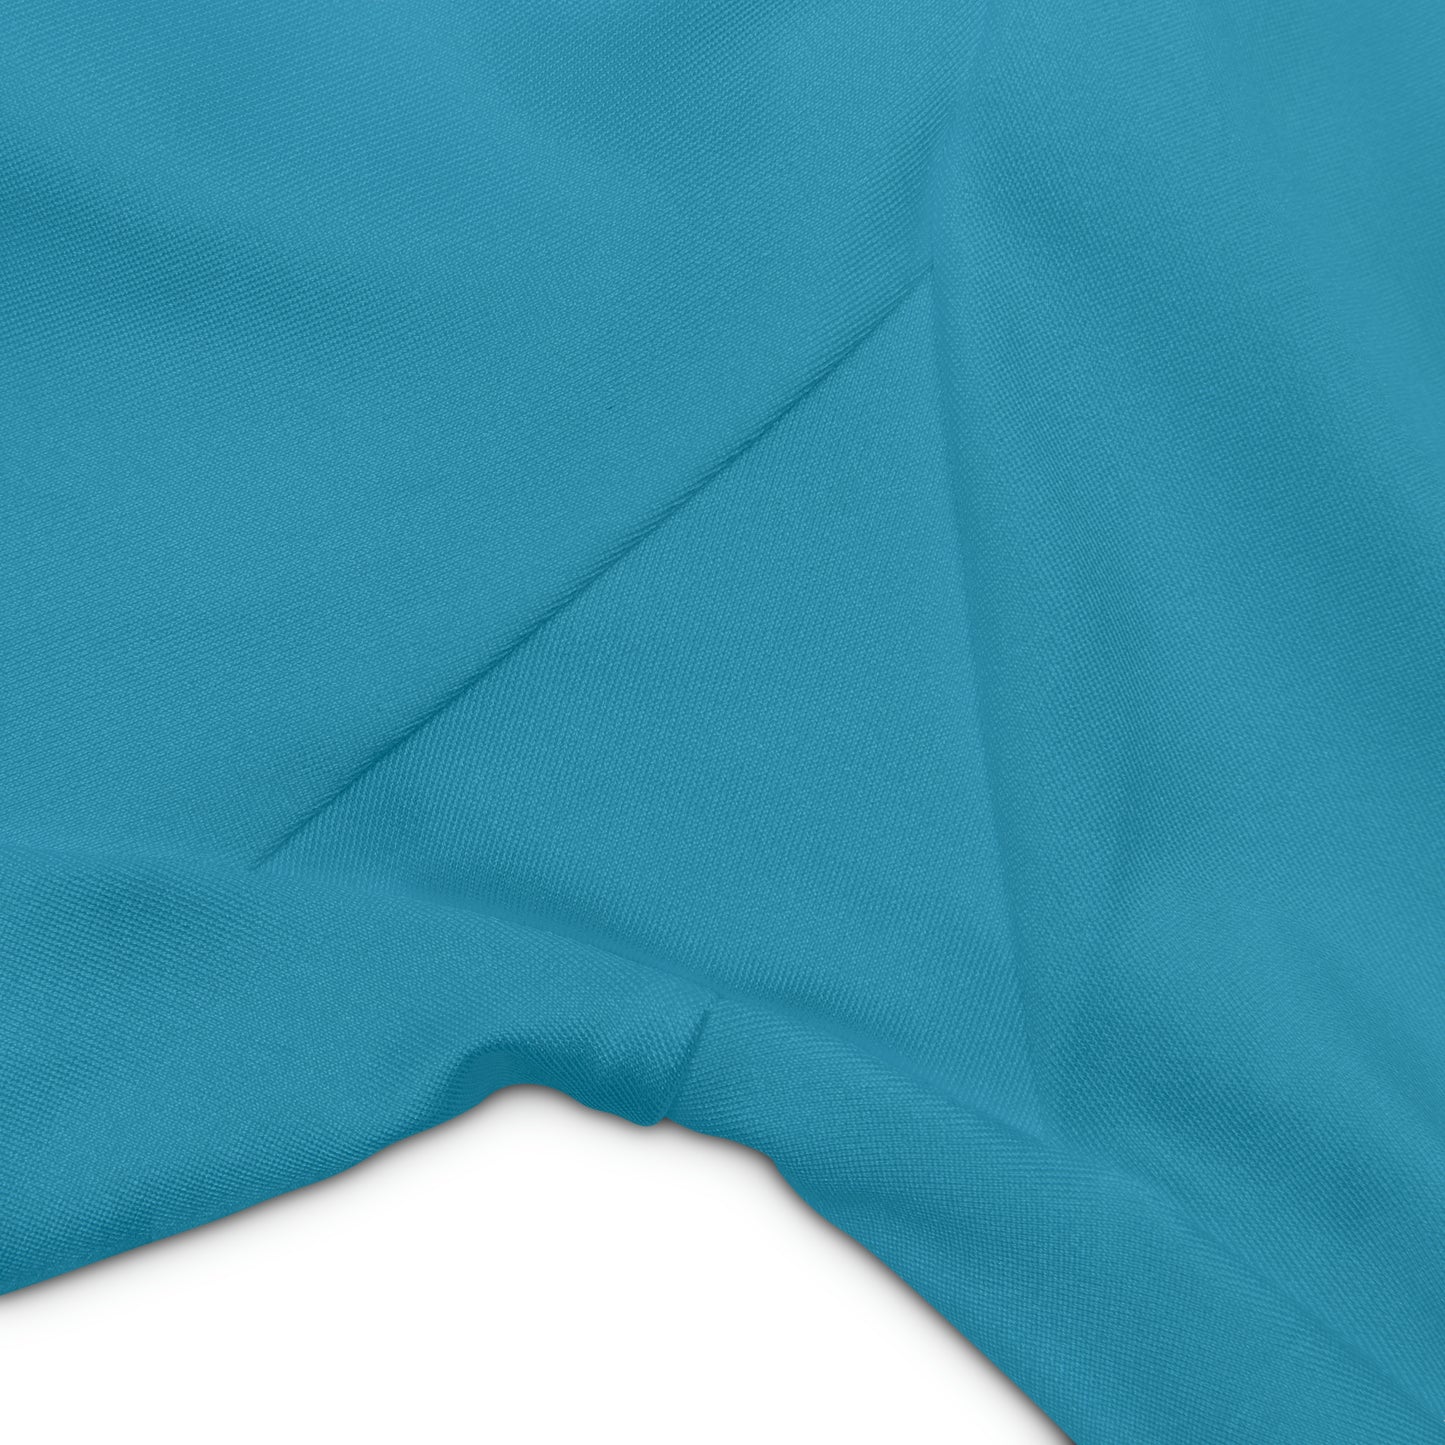 A Piece Of Crap WorkoutWit Shorts - Turquoise